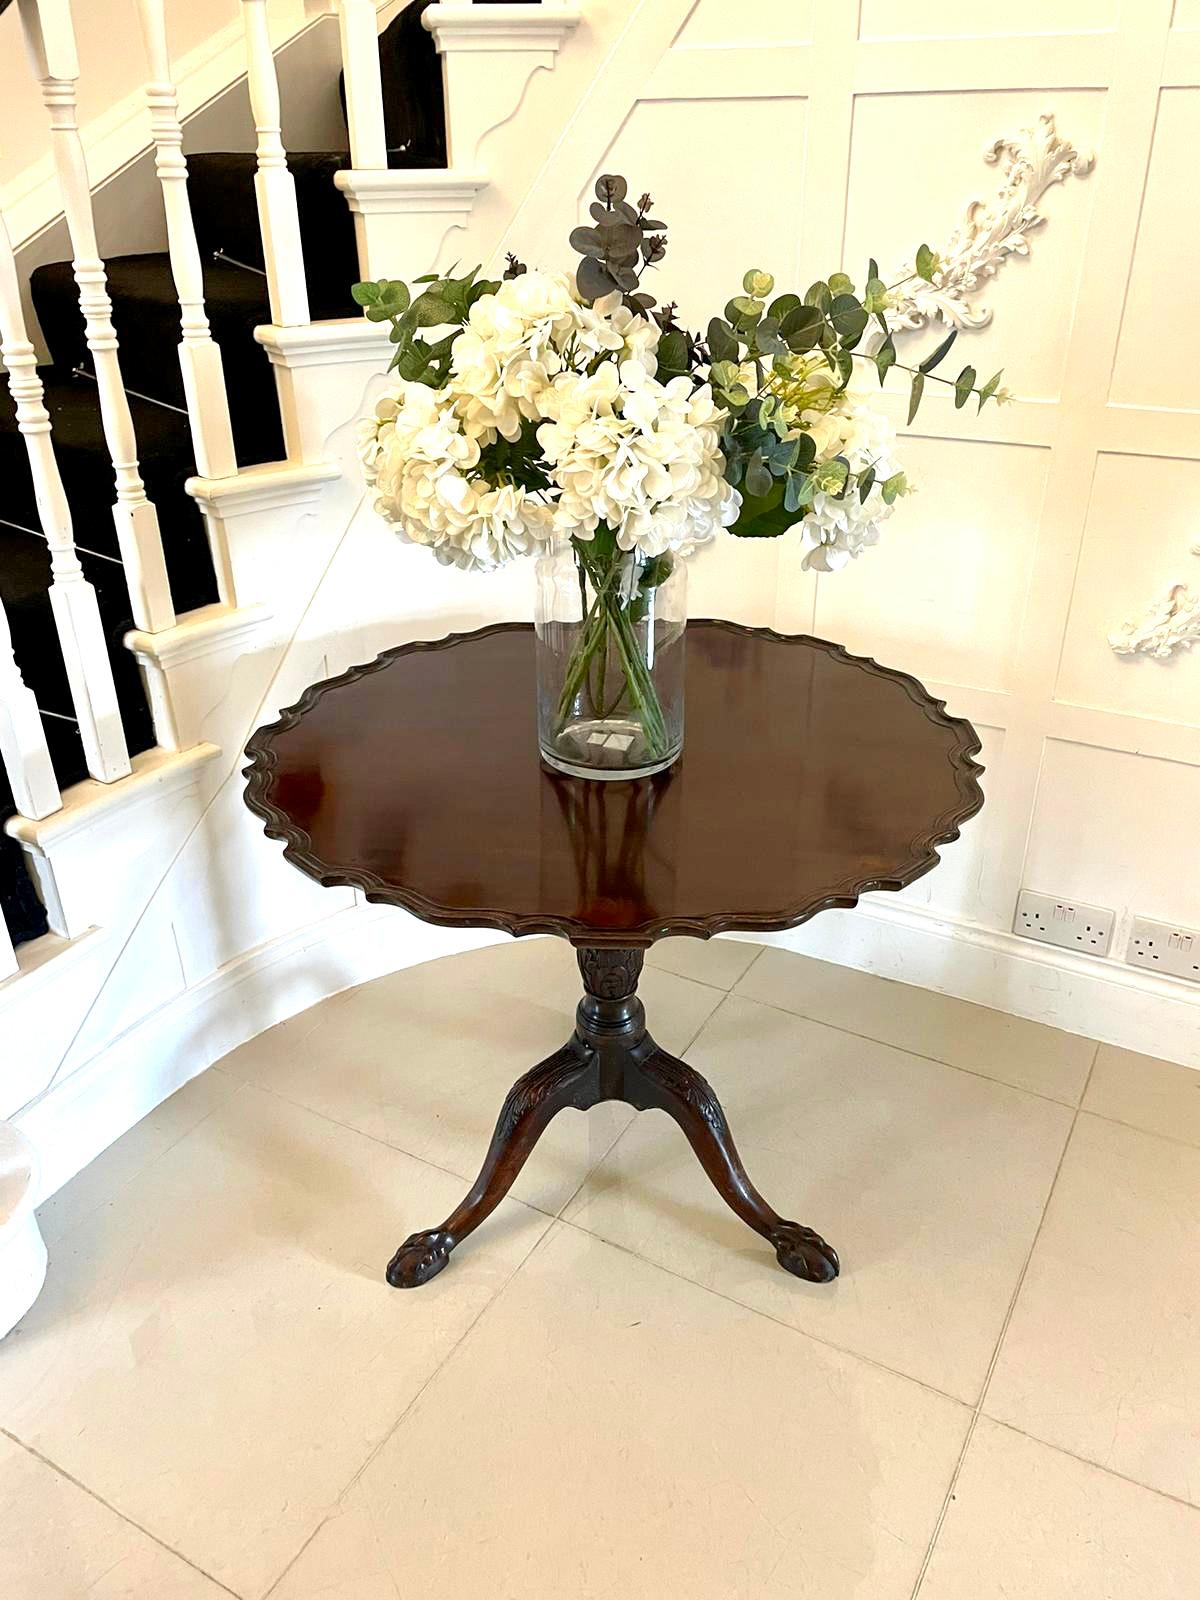 Outstanding quality antique George III mahogany centre table having a wonderful figured mahogany tilt top with a pie crust edge supported on a turned shaped carved mahogany pedestal column standing on shaped carved cabriole legs with claw feet 


A